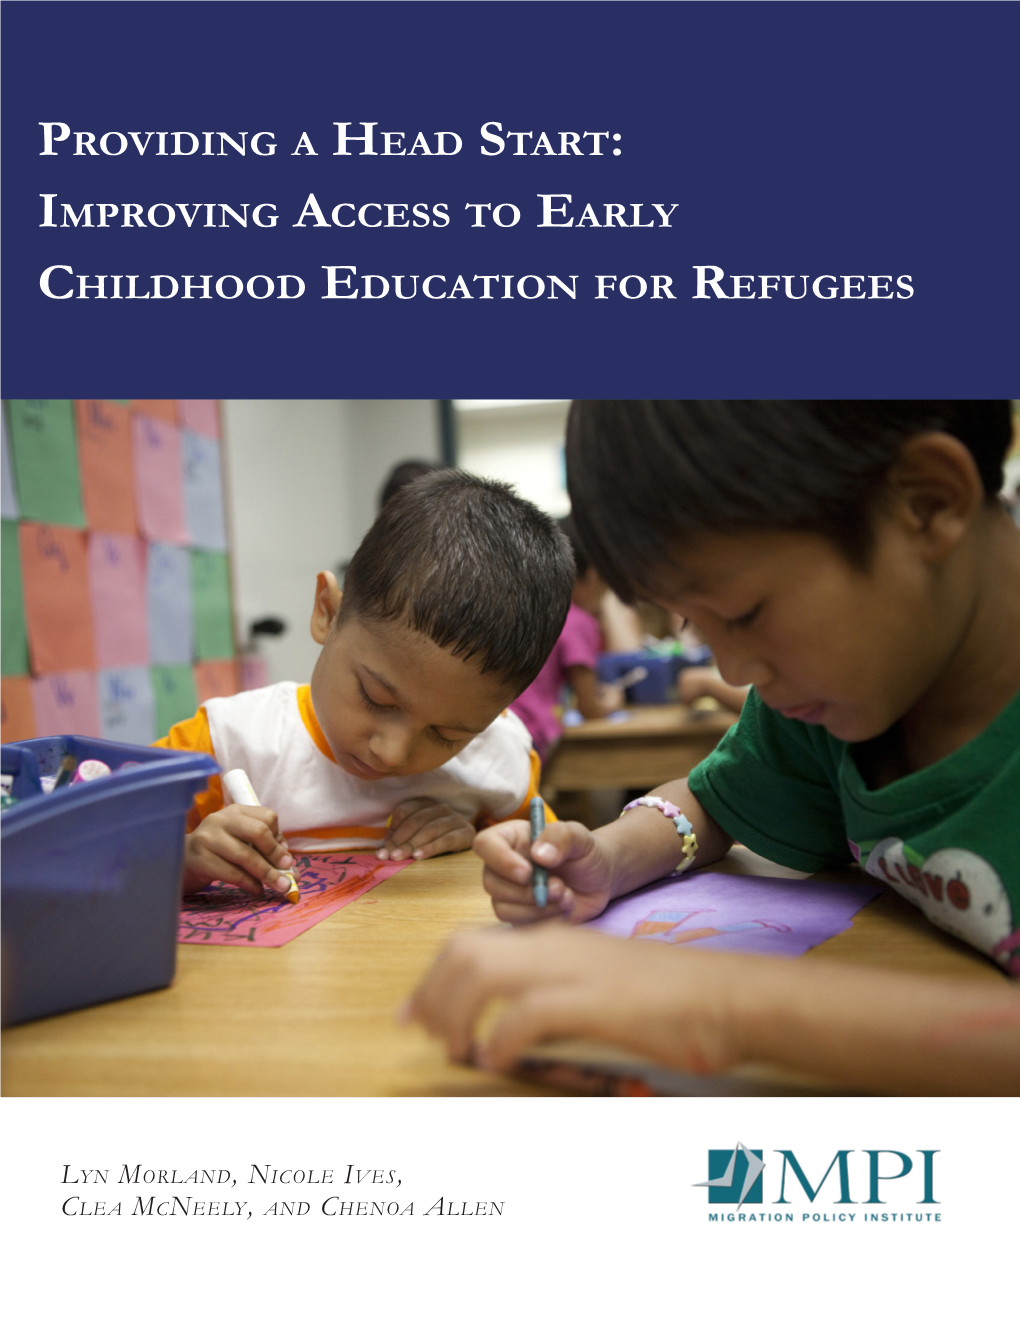 Providing a Head Start: Improving Access to Early Childhood Education for Refugees